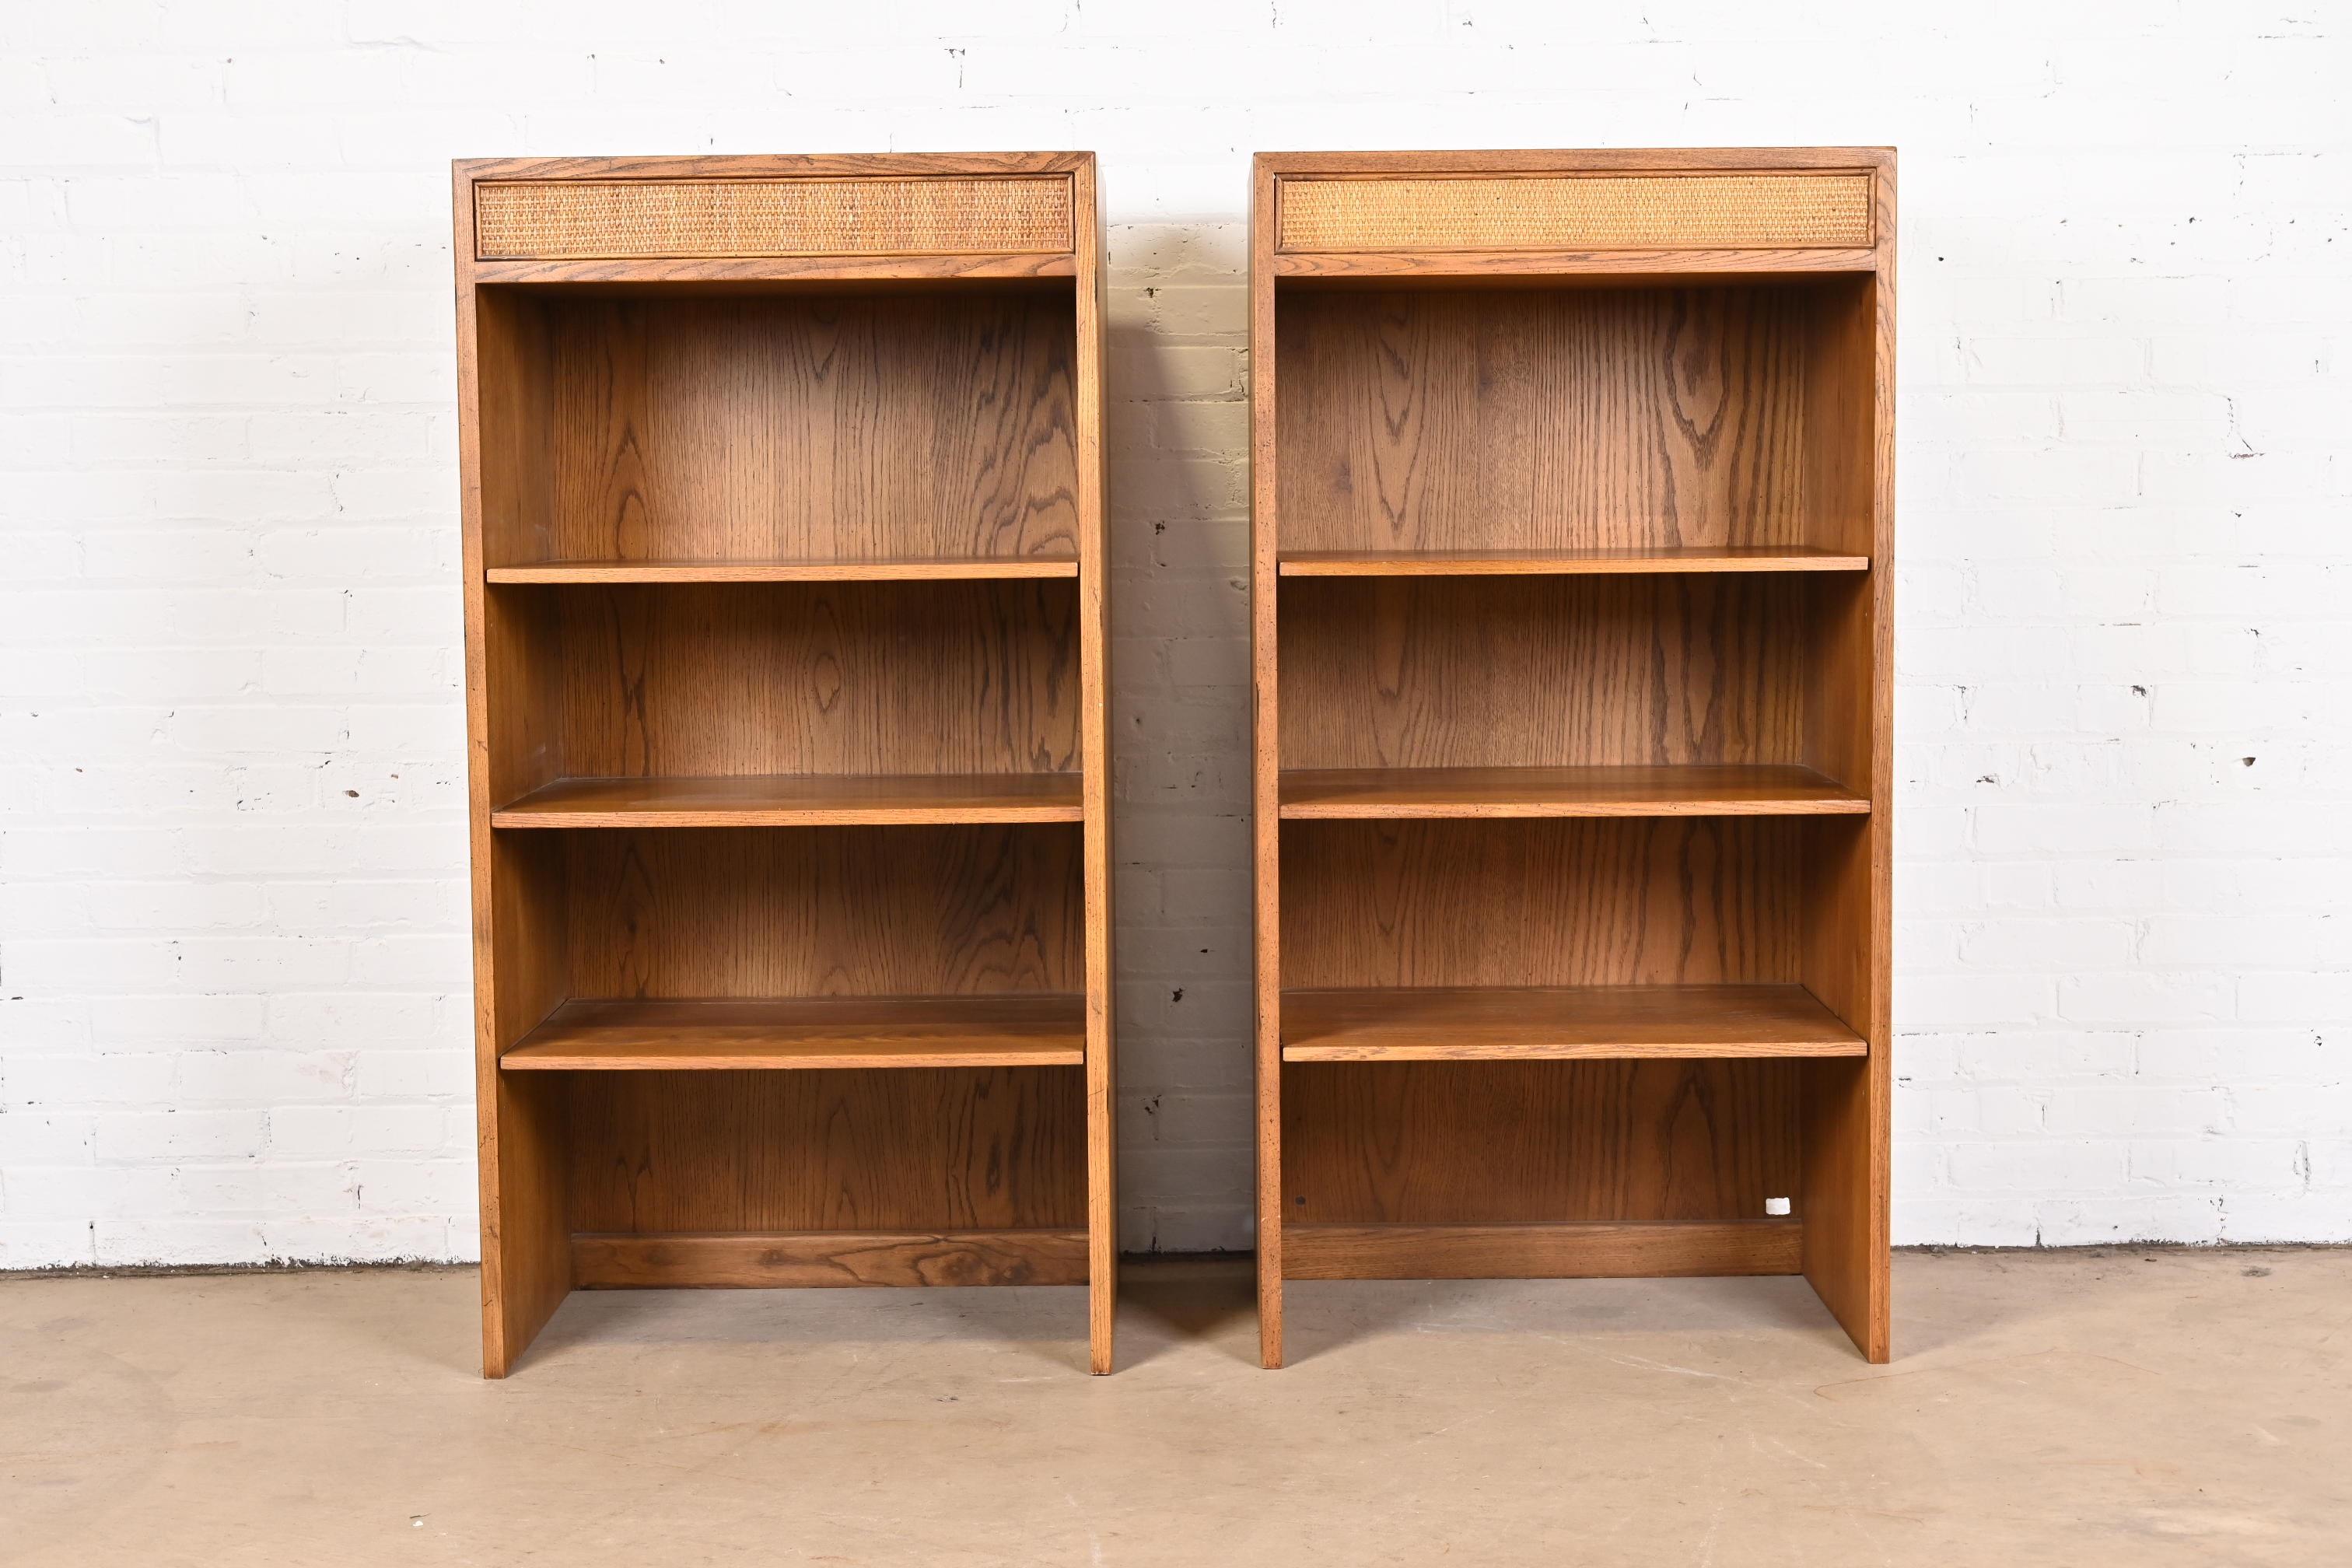 American Henredon Mid-Century Modern Oak and Cane Bookcases, Pair